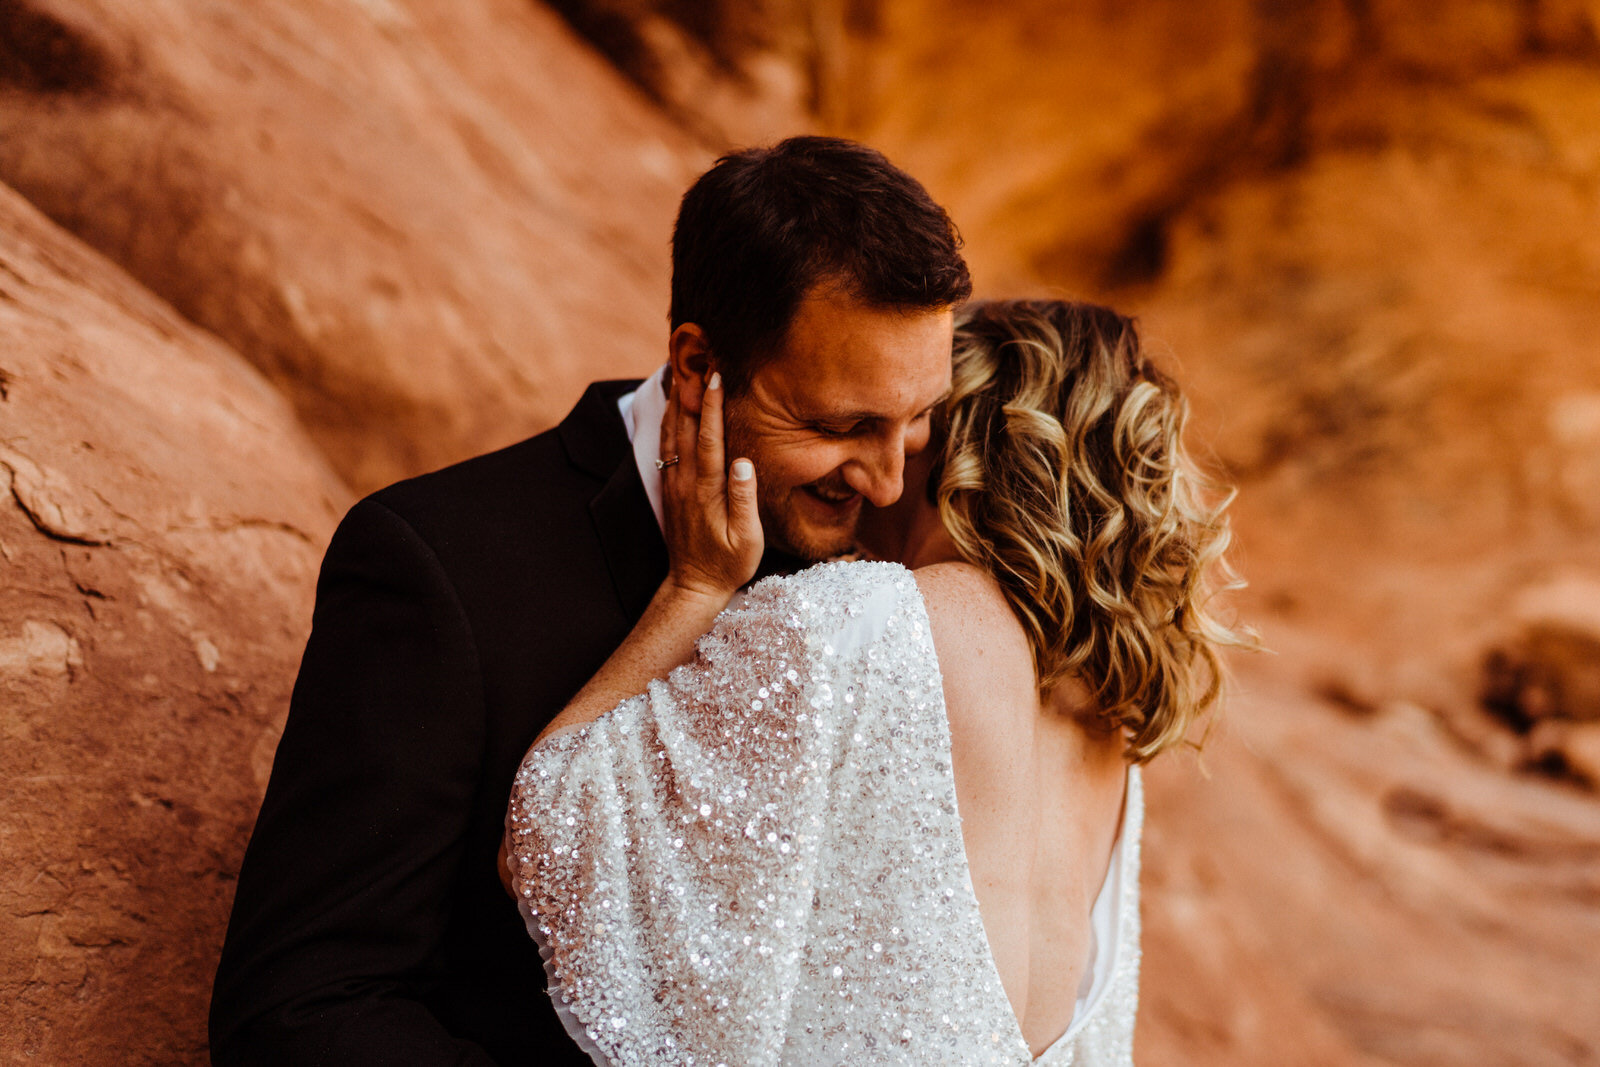 Arches-National-Park-Wedding-groom-romantically-kissing-bride-at-double-arches (2).jpg